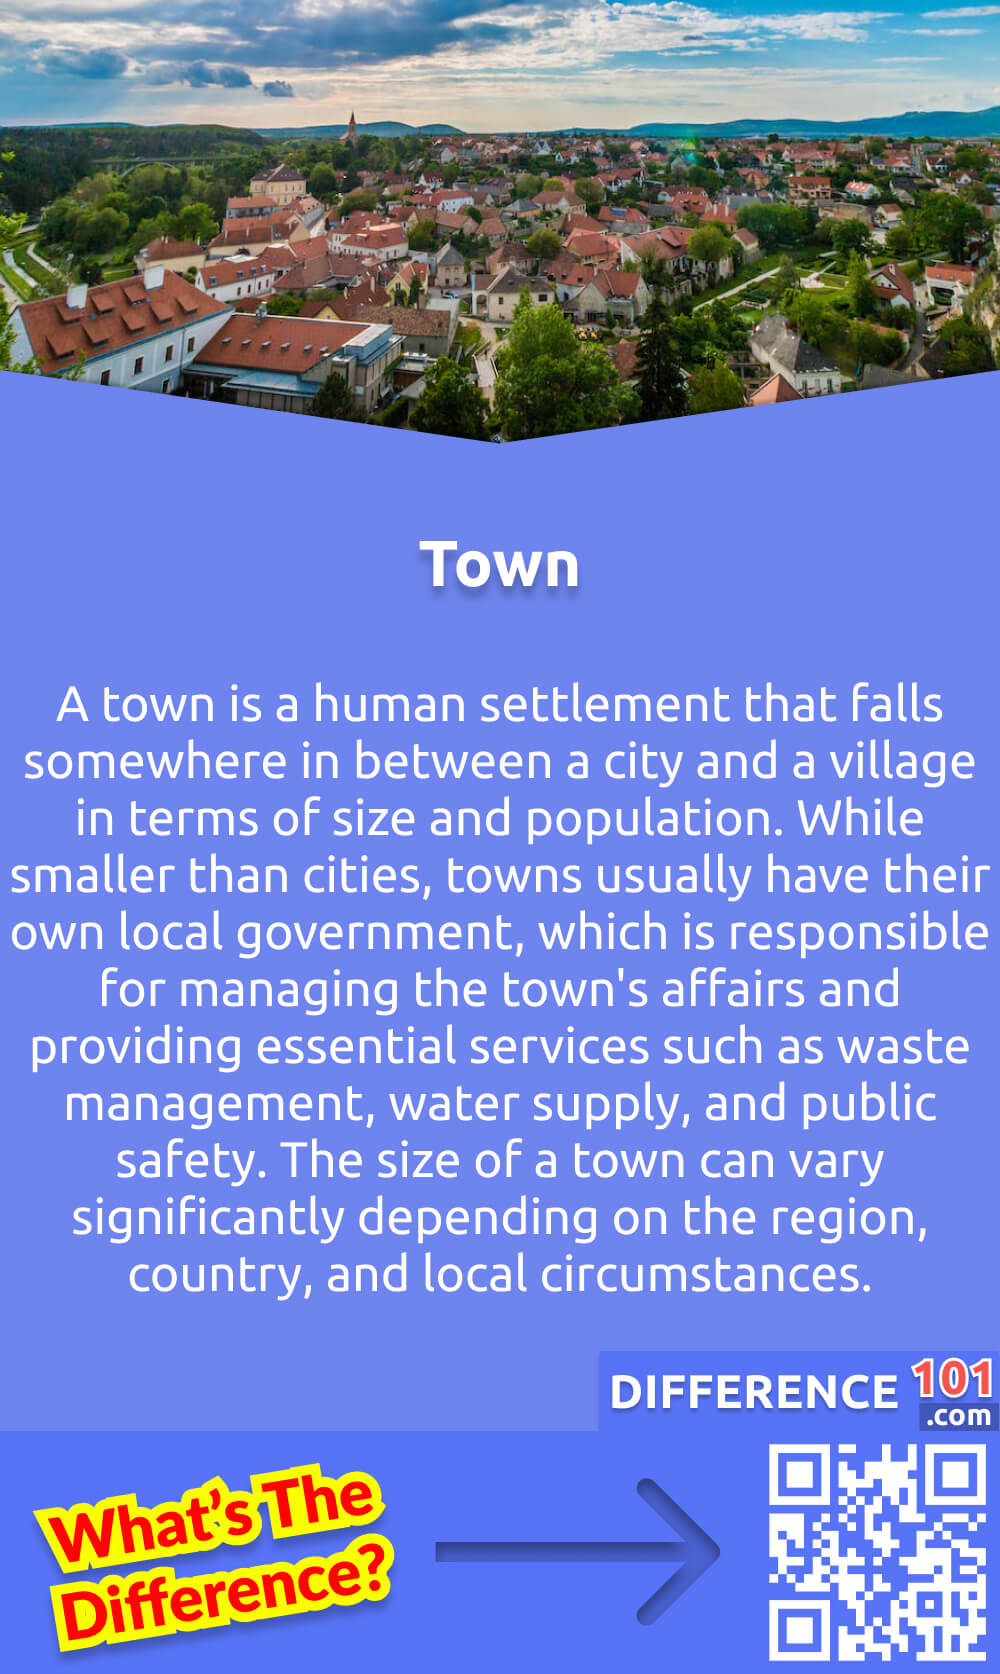 What Is Town? A town is a human settlement that falls somewhere in between a city and a village in terms of size and population. While smaller than cities, towns usually have their own local government, which is responsible for managing the town's affairs and providing essential services such as waste management, water supply, and public safety. Towns typically have a well-defined central area with commercial, residential, and industrial zones. They may have limited infrastructure, including transportation networks and public amenities, but are often more organized and cohesive than villages. The size of a town can vary significantly depending on the region, country, and local circumstances.